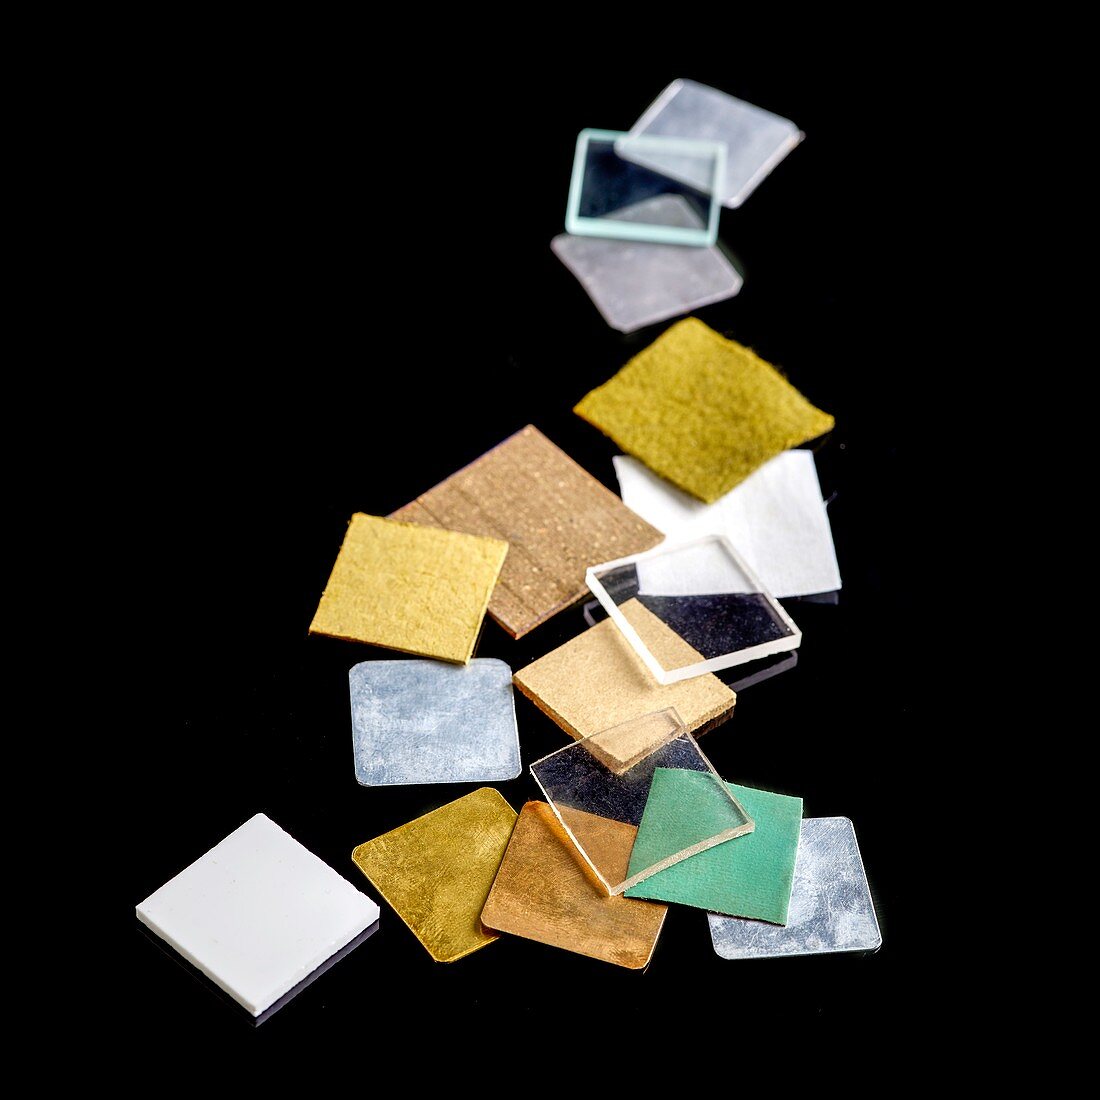 Squares of everyday materials